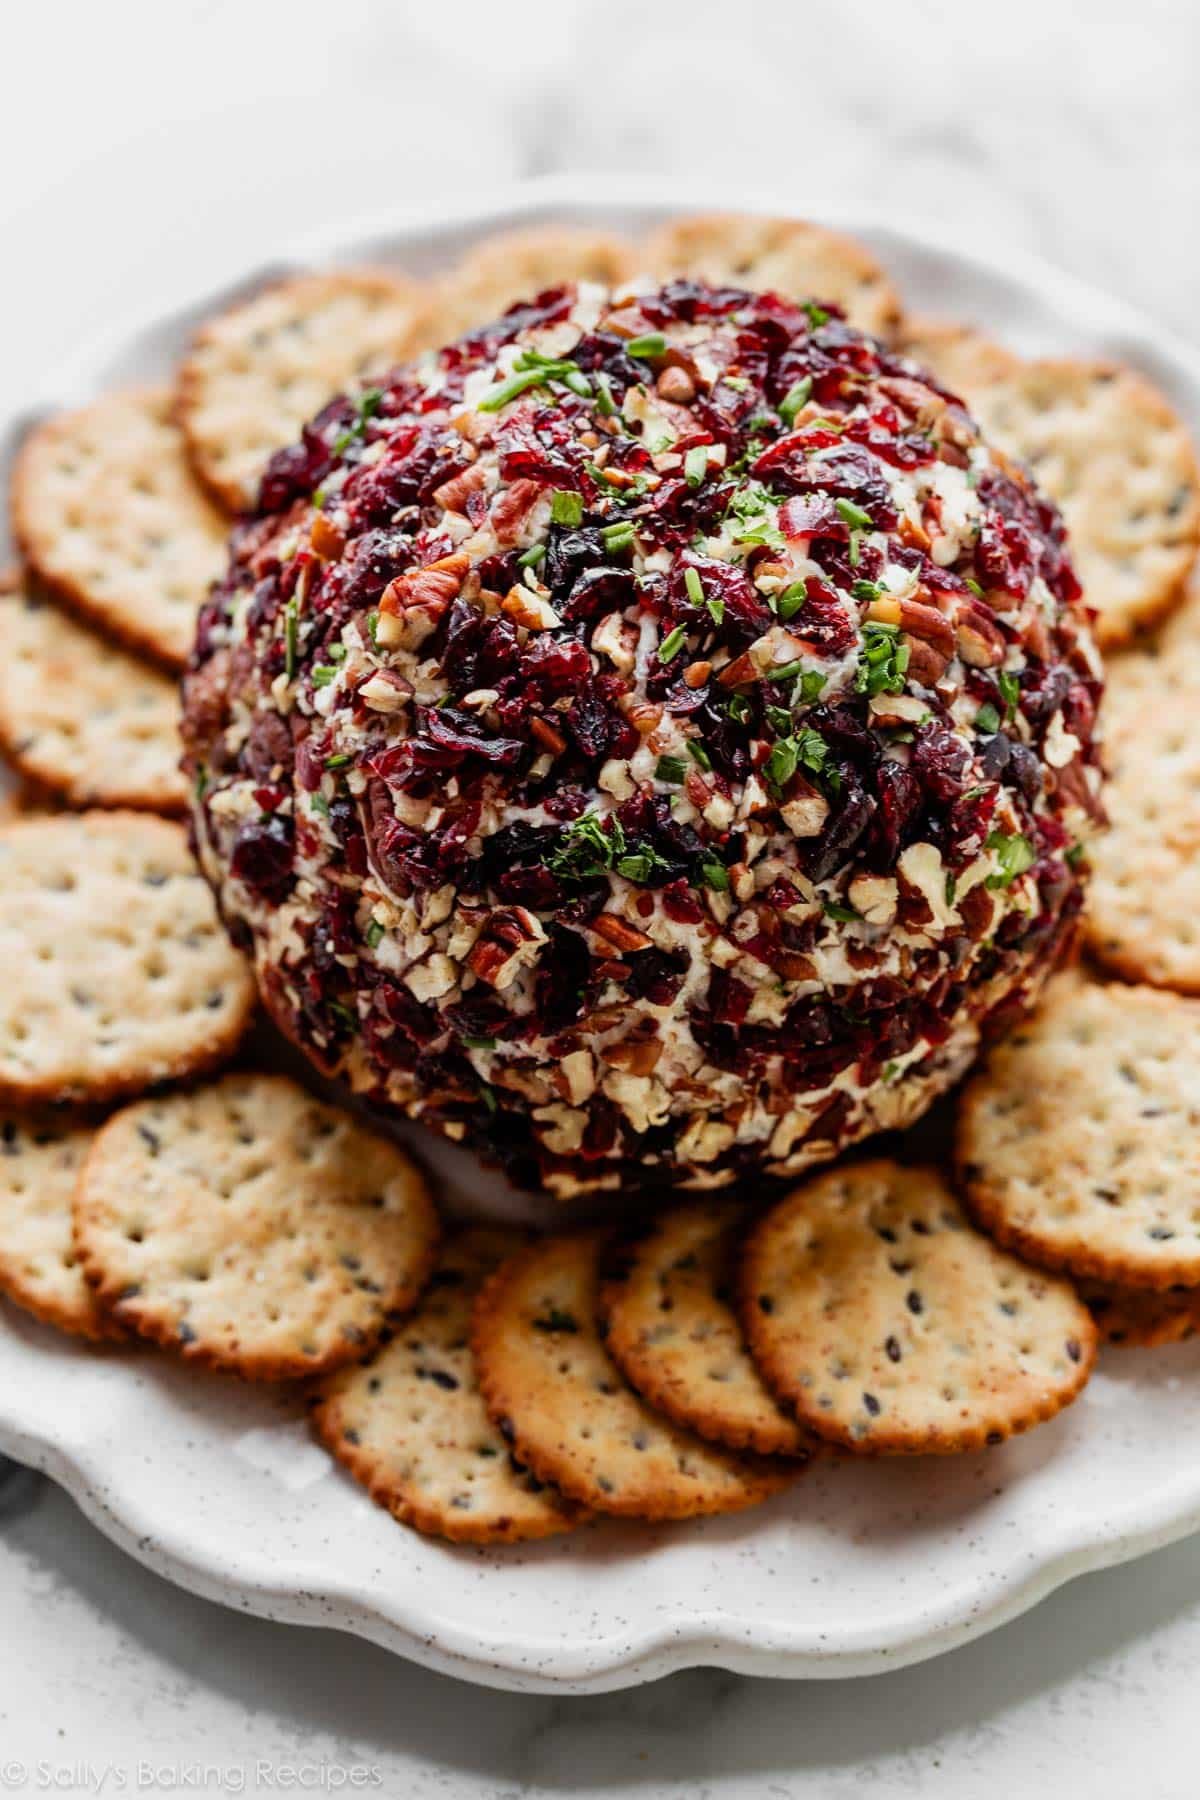 cheese ball coated in pecans, cranberries, and chives on plate with crackers.